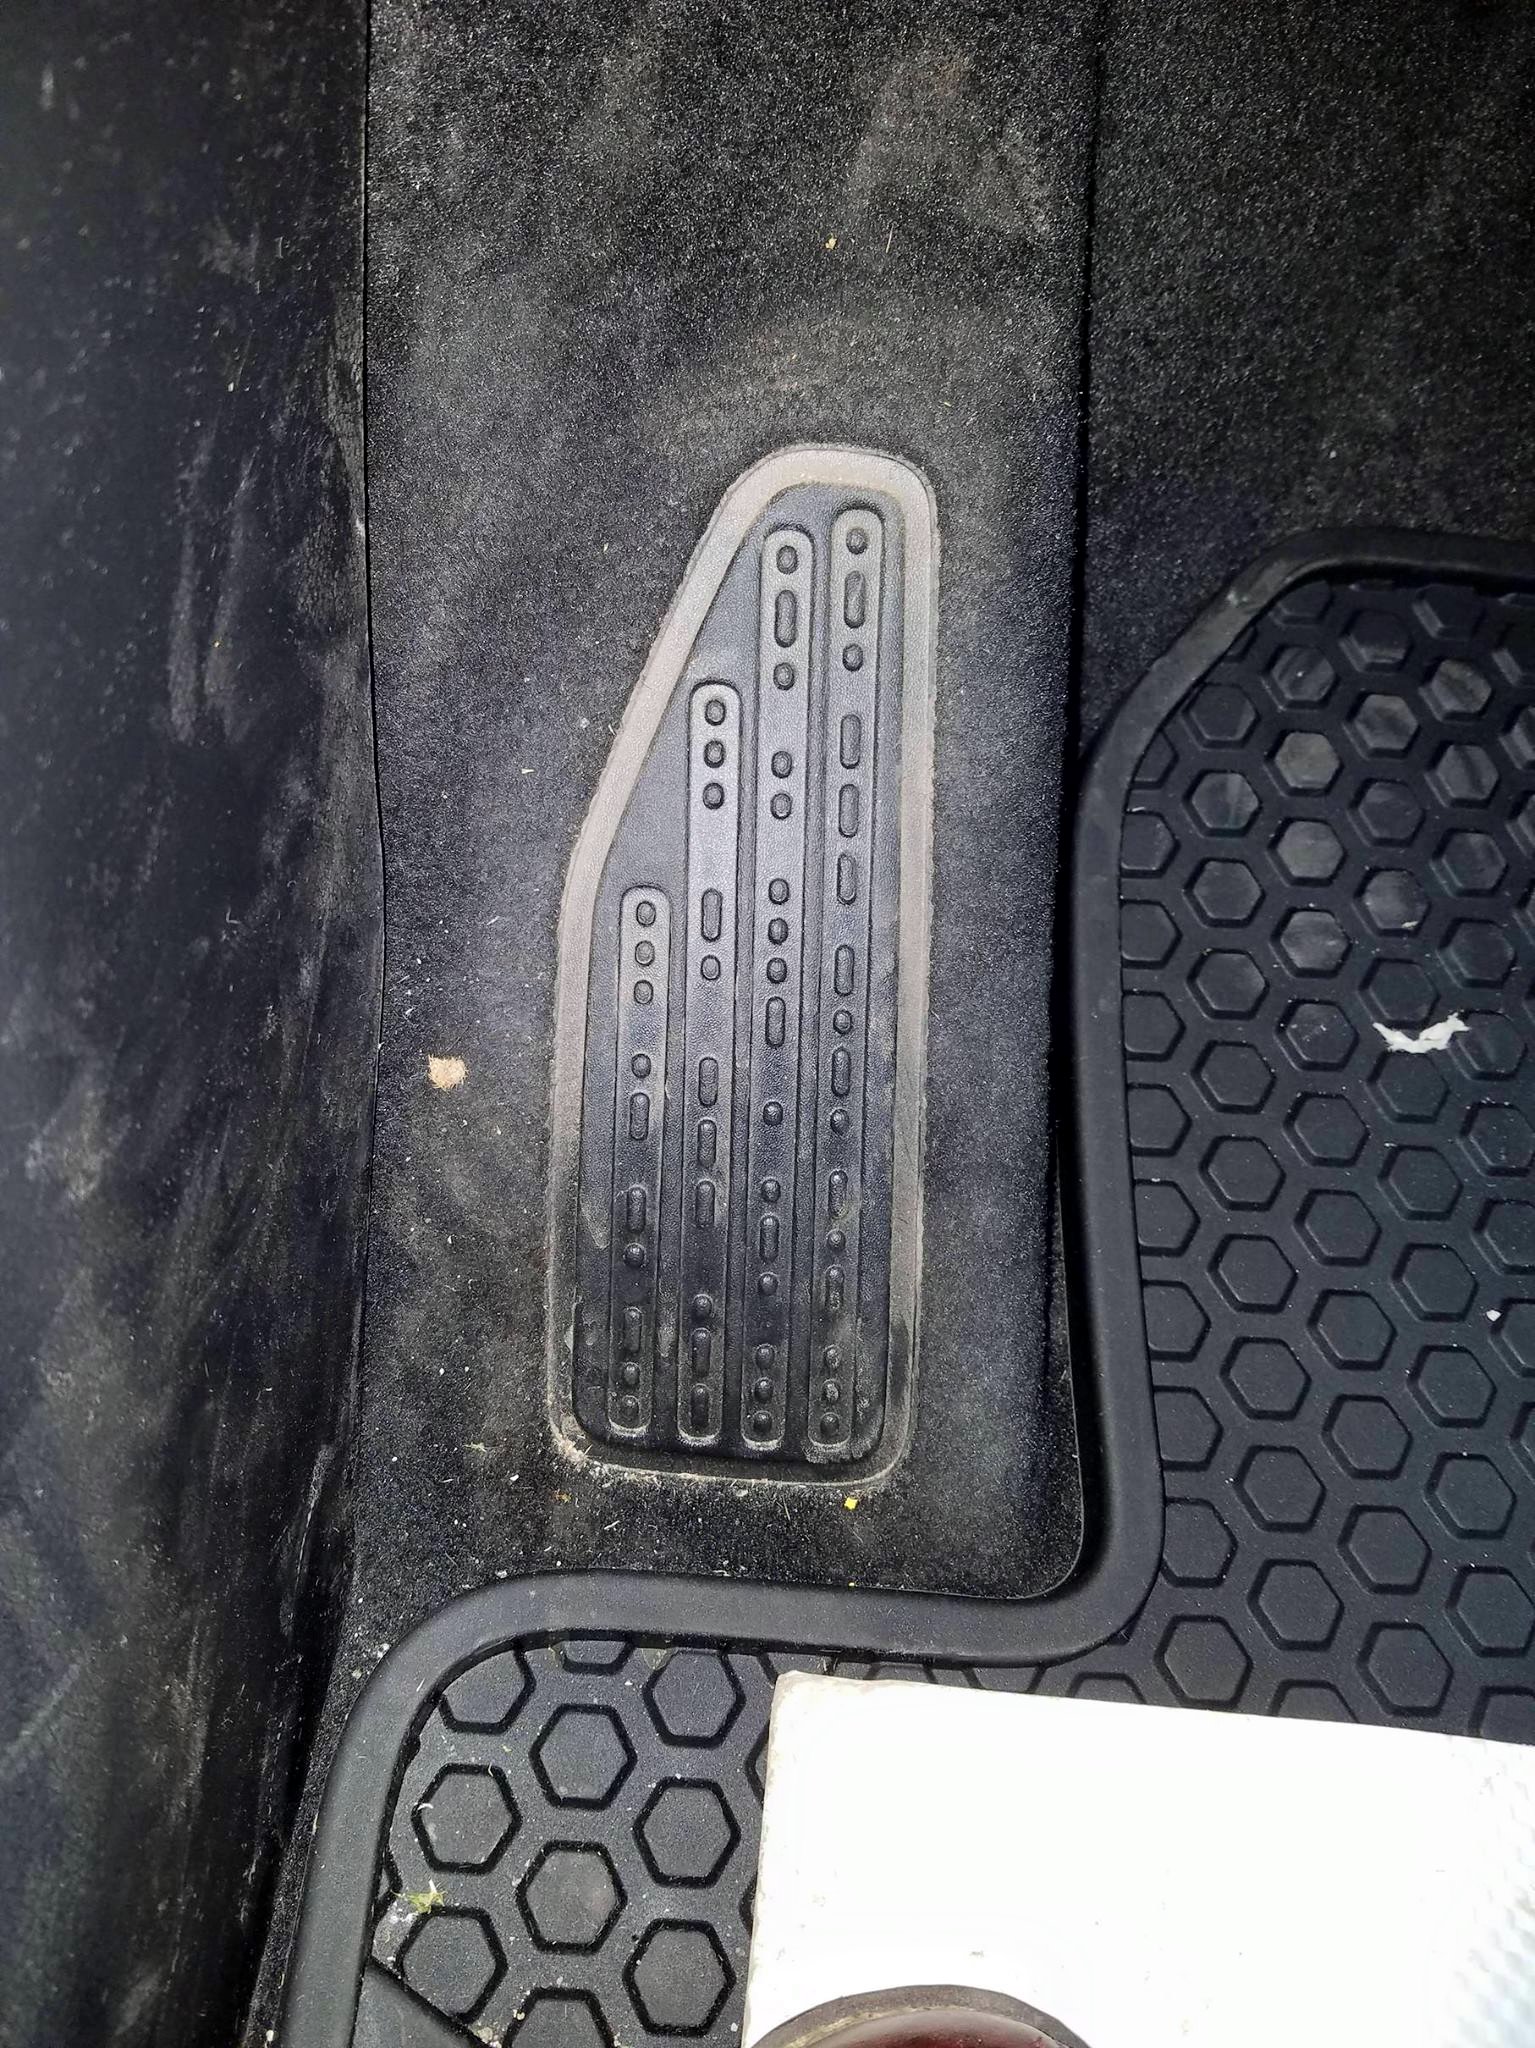 Foot rest with dots on it from a Jeep. The footrest in my new Jeep says, "sand snow rivers rocks" in Morse code